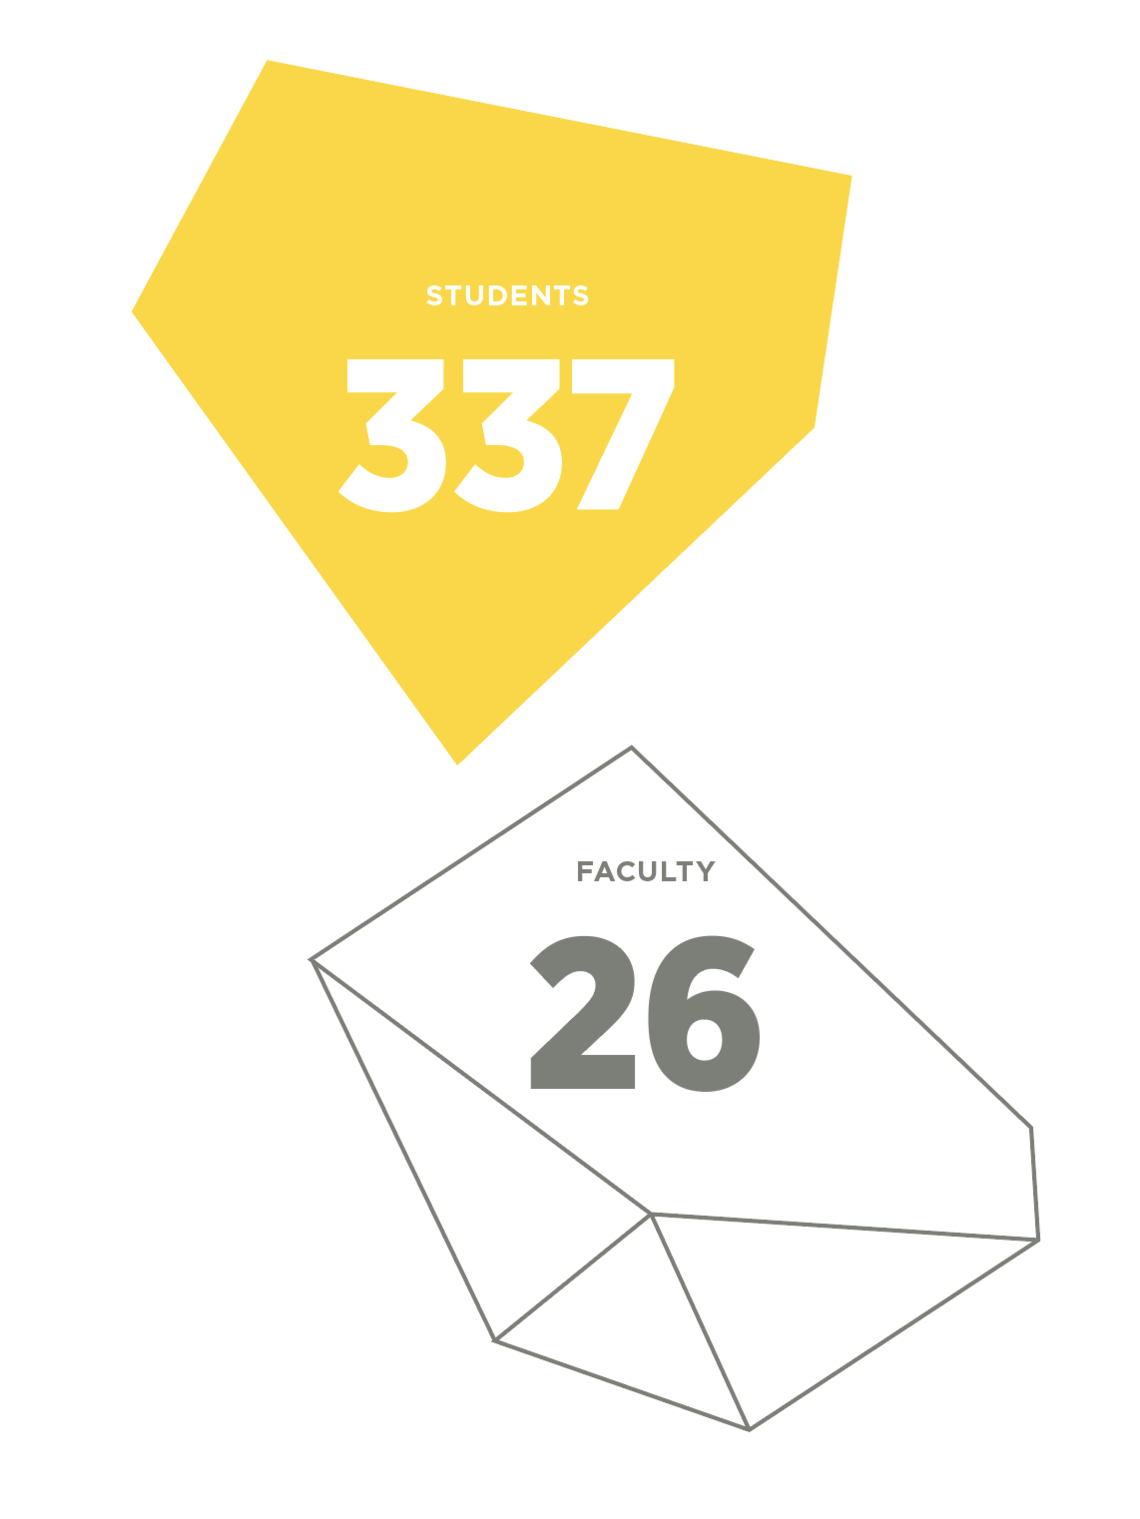 SAPL Student and faculty numbers